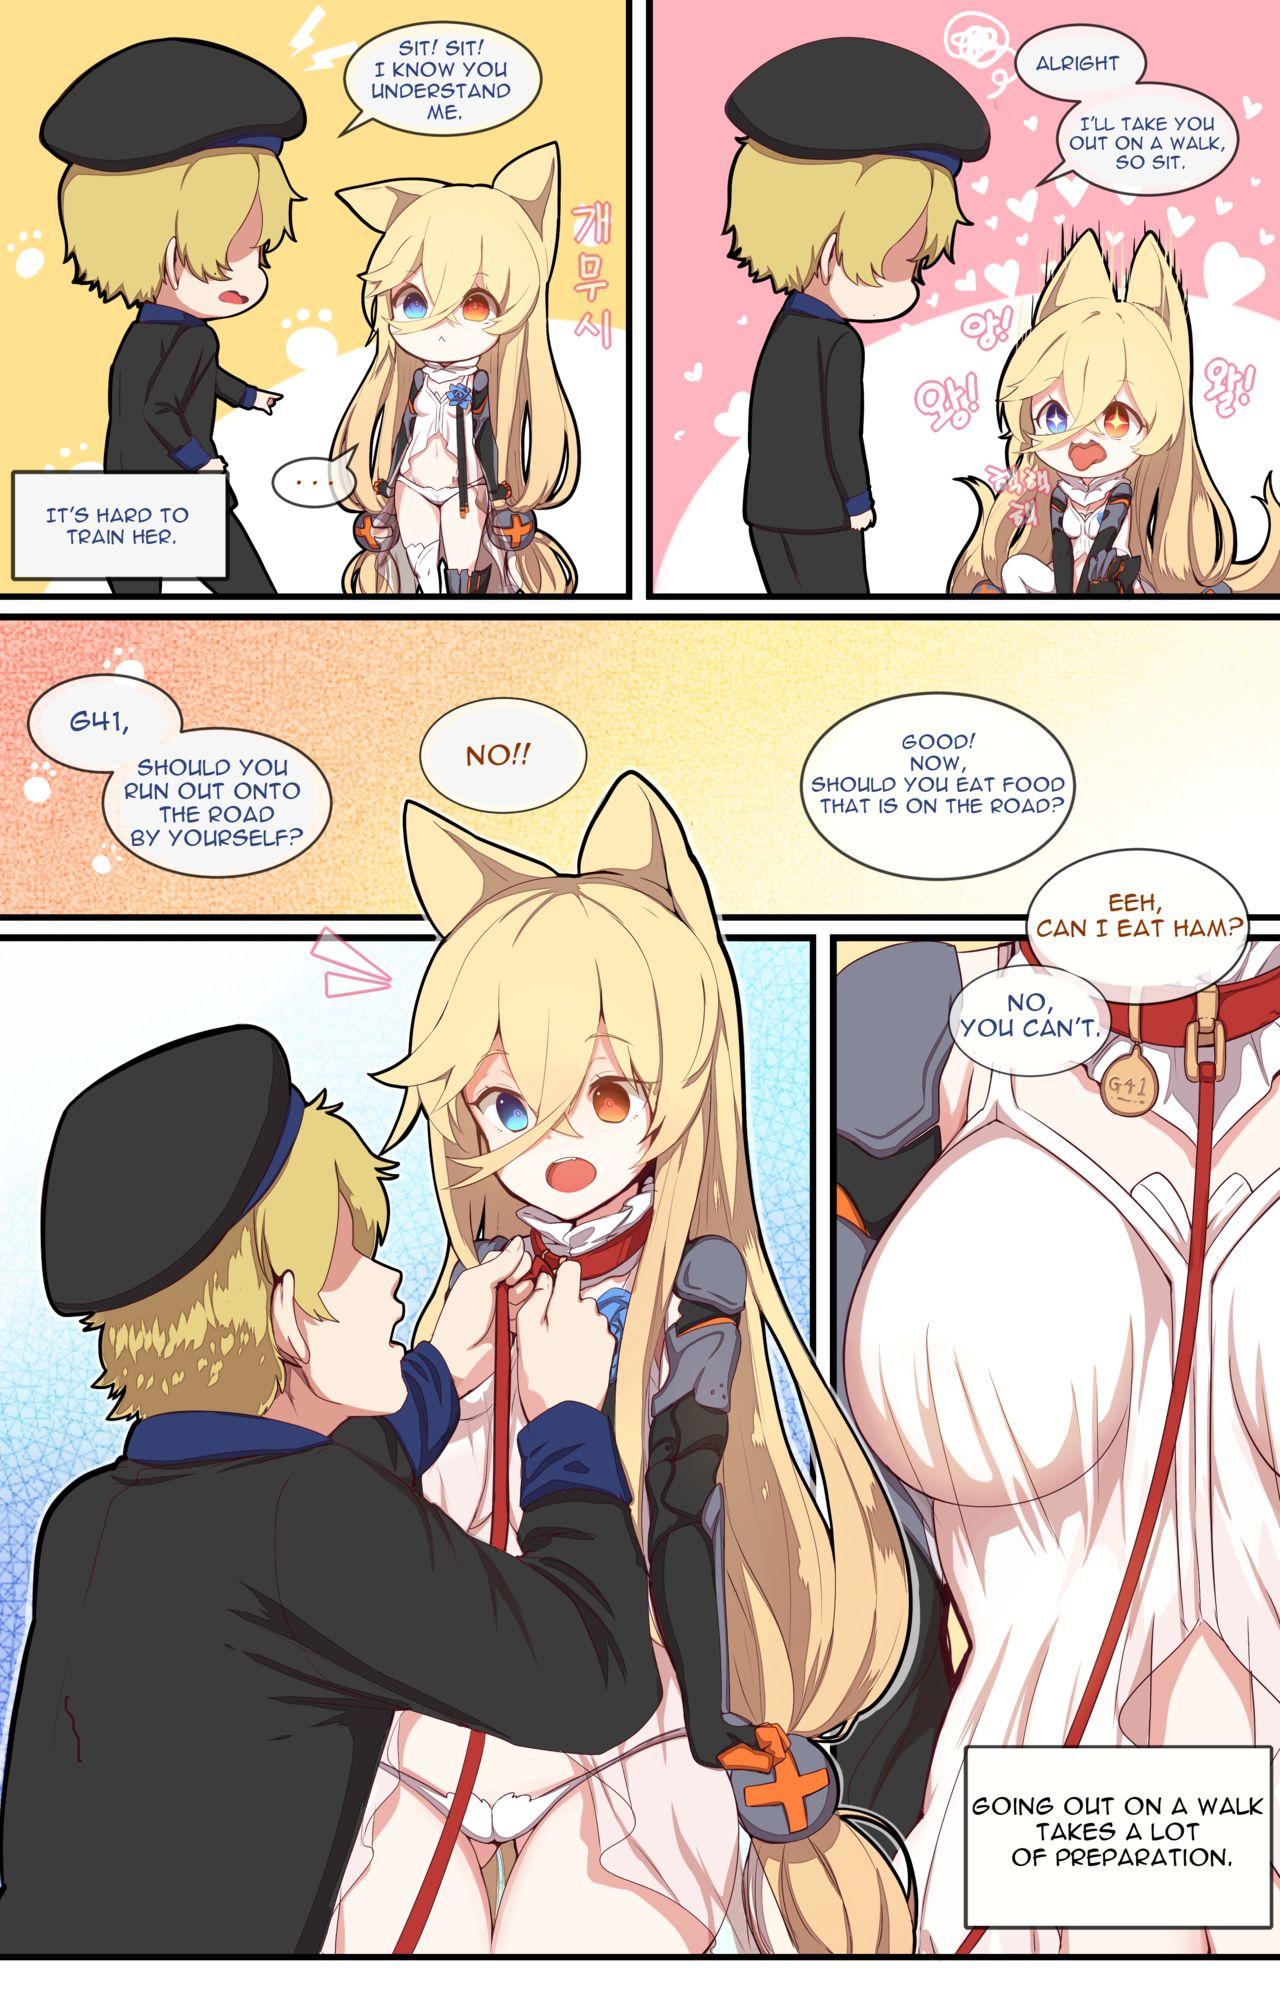 Fetiche How to Use Dolls 04 - Girls frontline Analfucking - Page 3